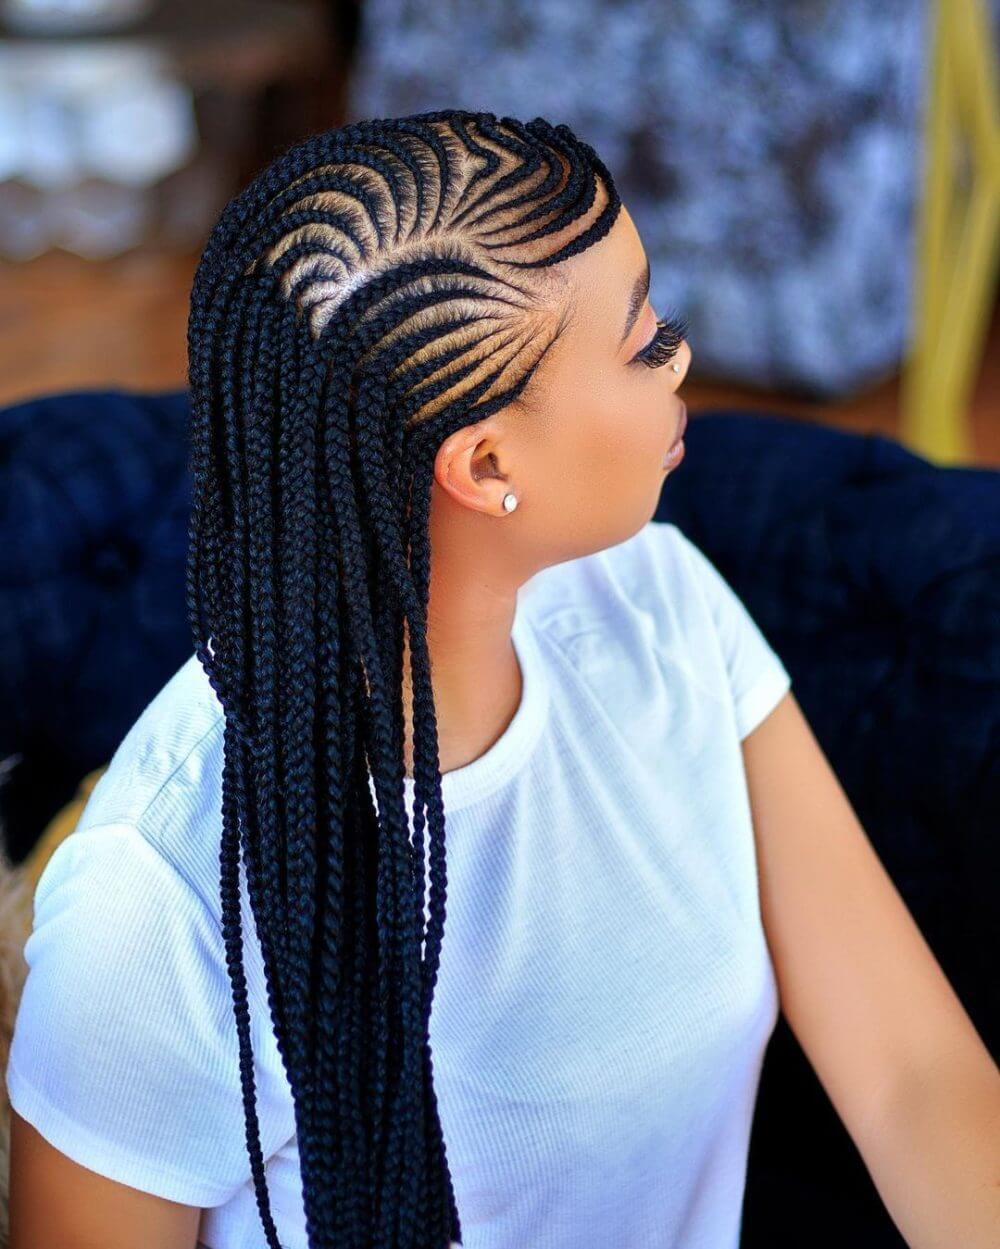 50 Trendy Braided Hairstyles To Instantly Glam Up Your Look - 331